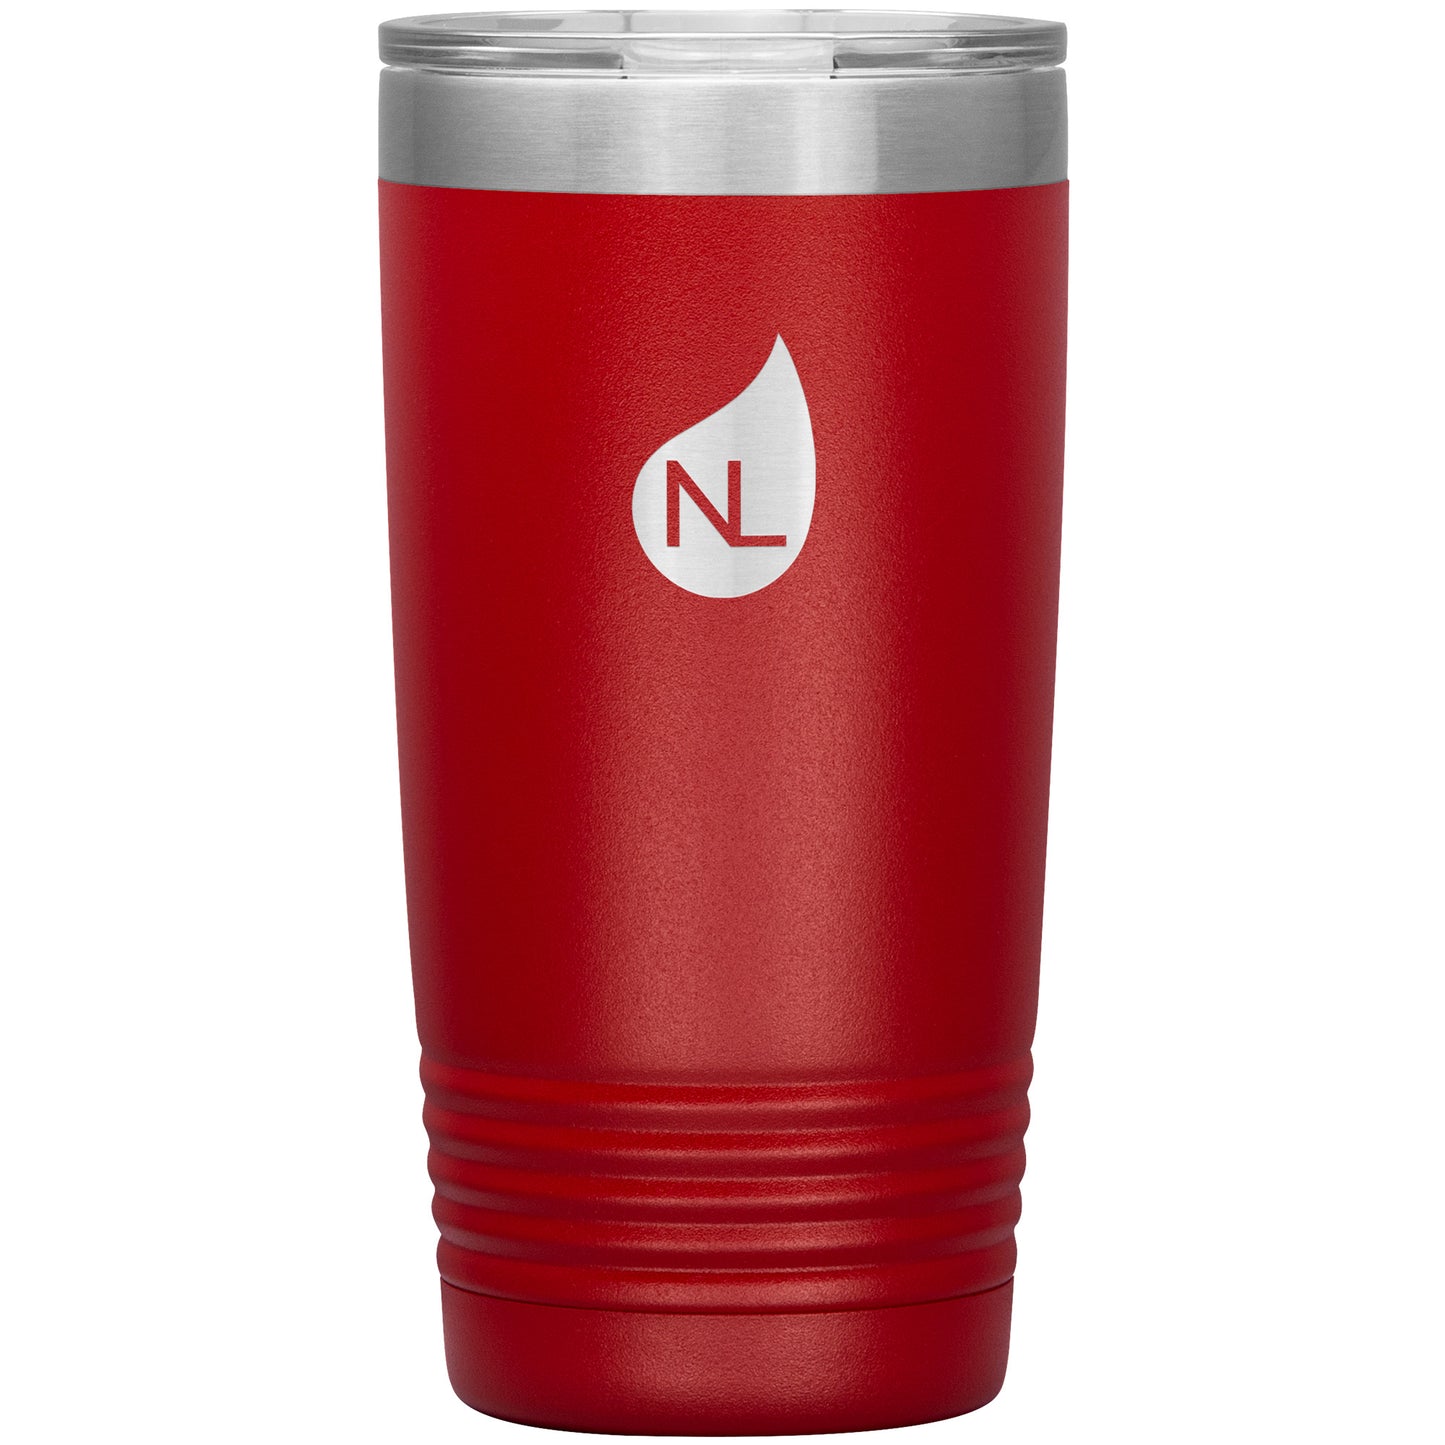 NL ICON Insulated Tumblers